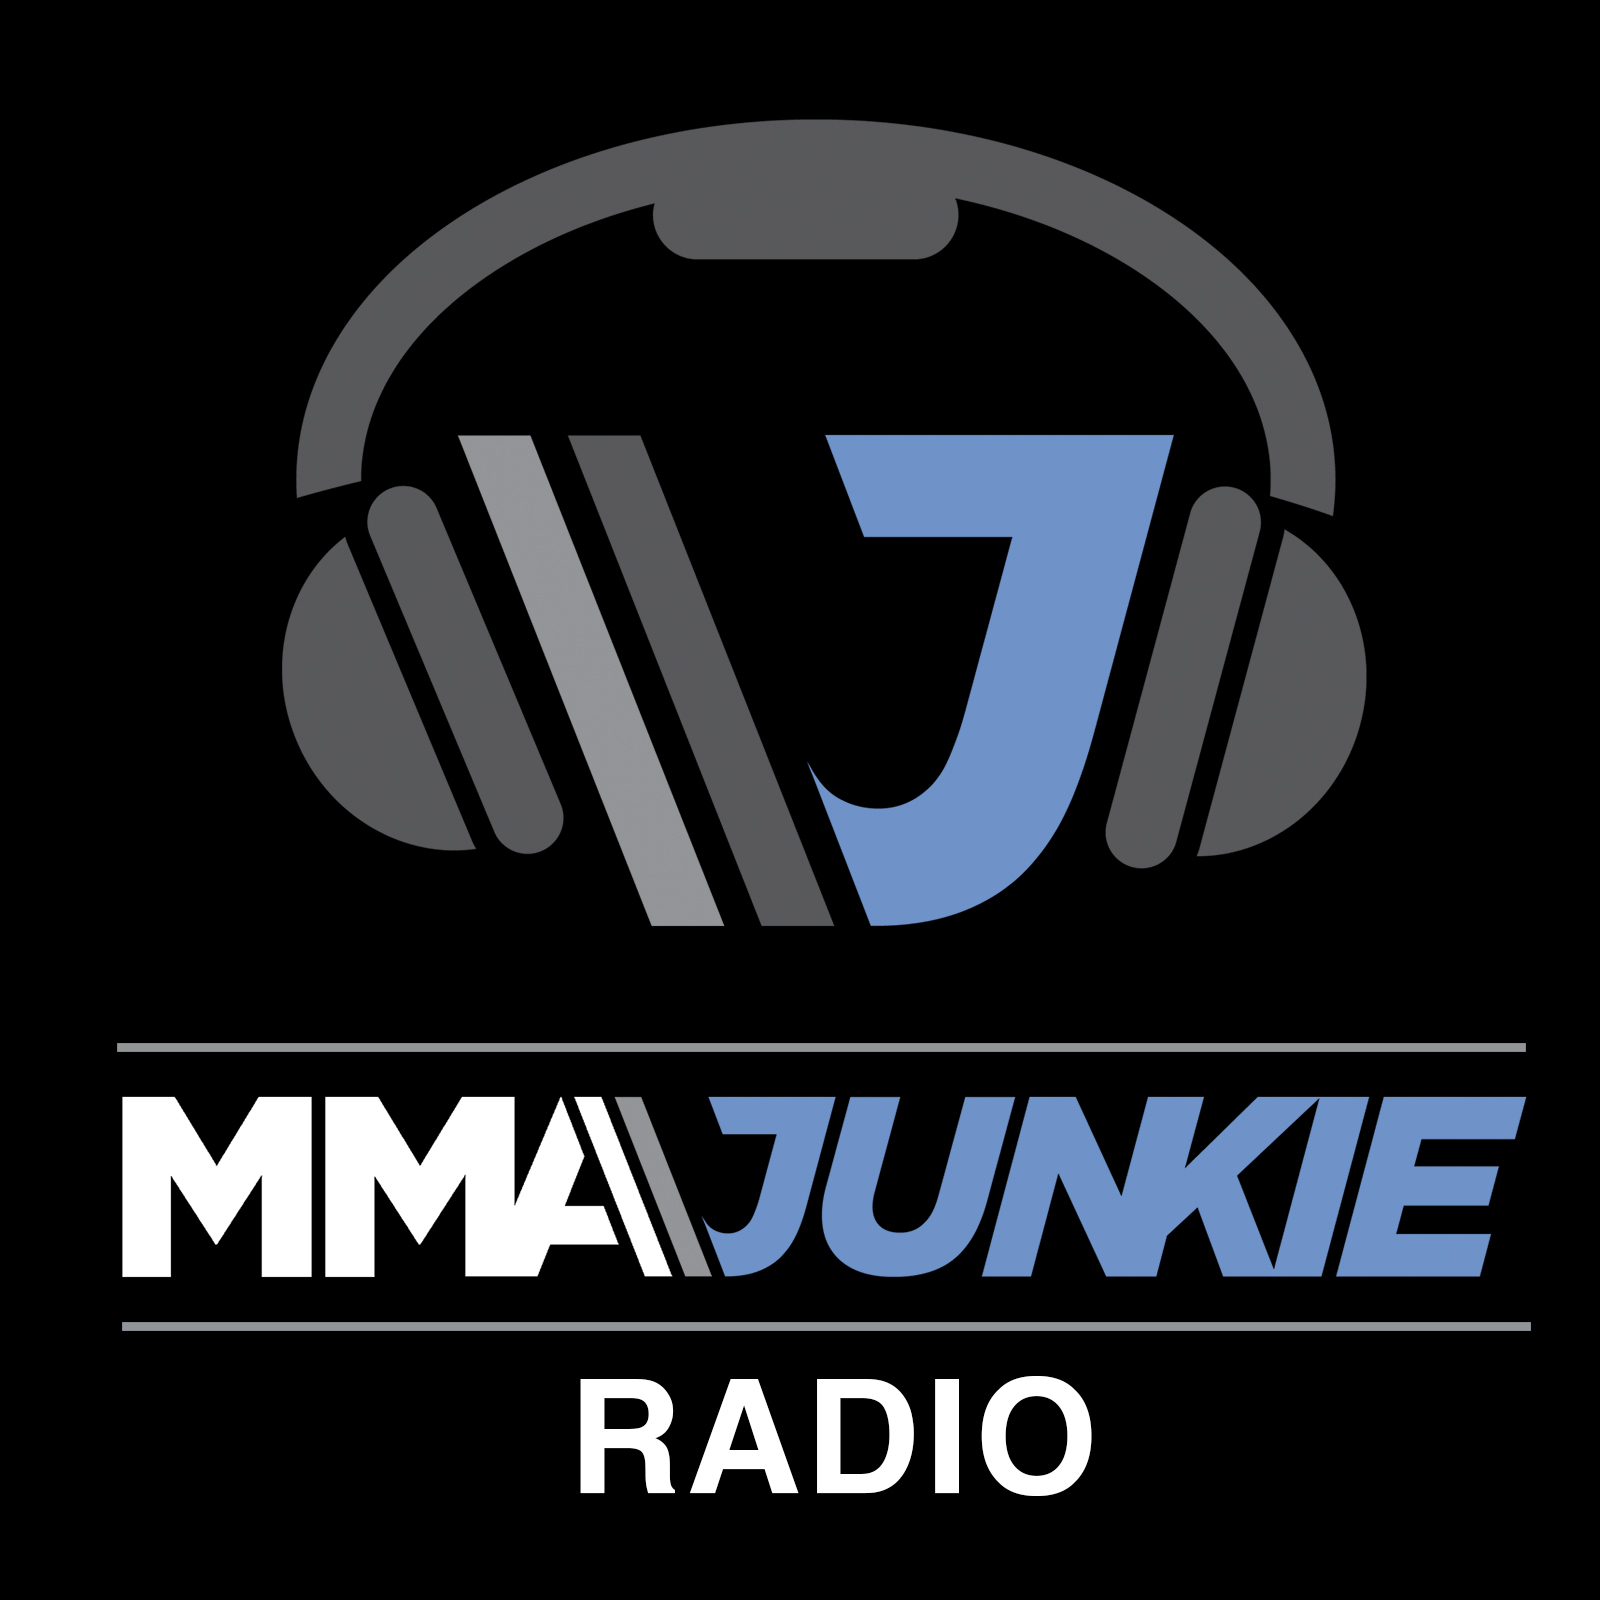 Ep. #3302: Luke Rockhold joins the show, Cub doesn’t speak at the presser, more